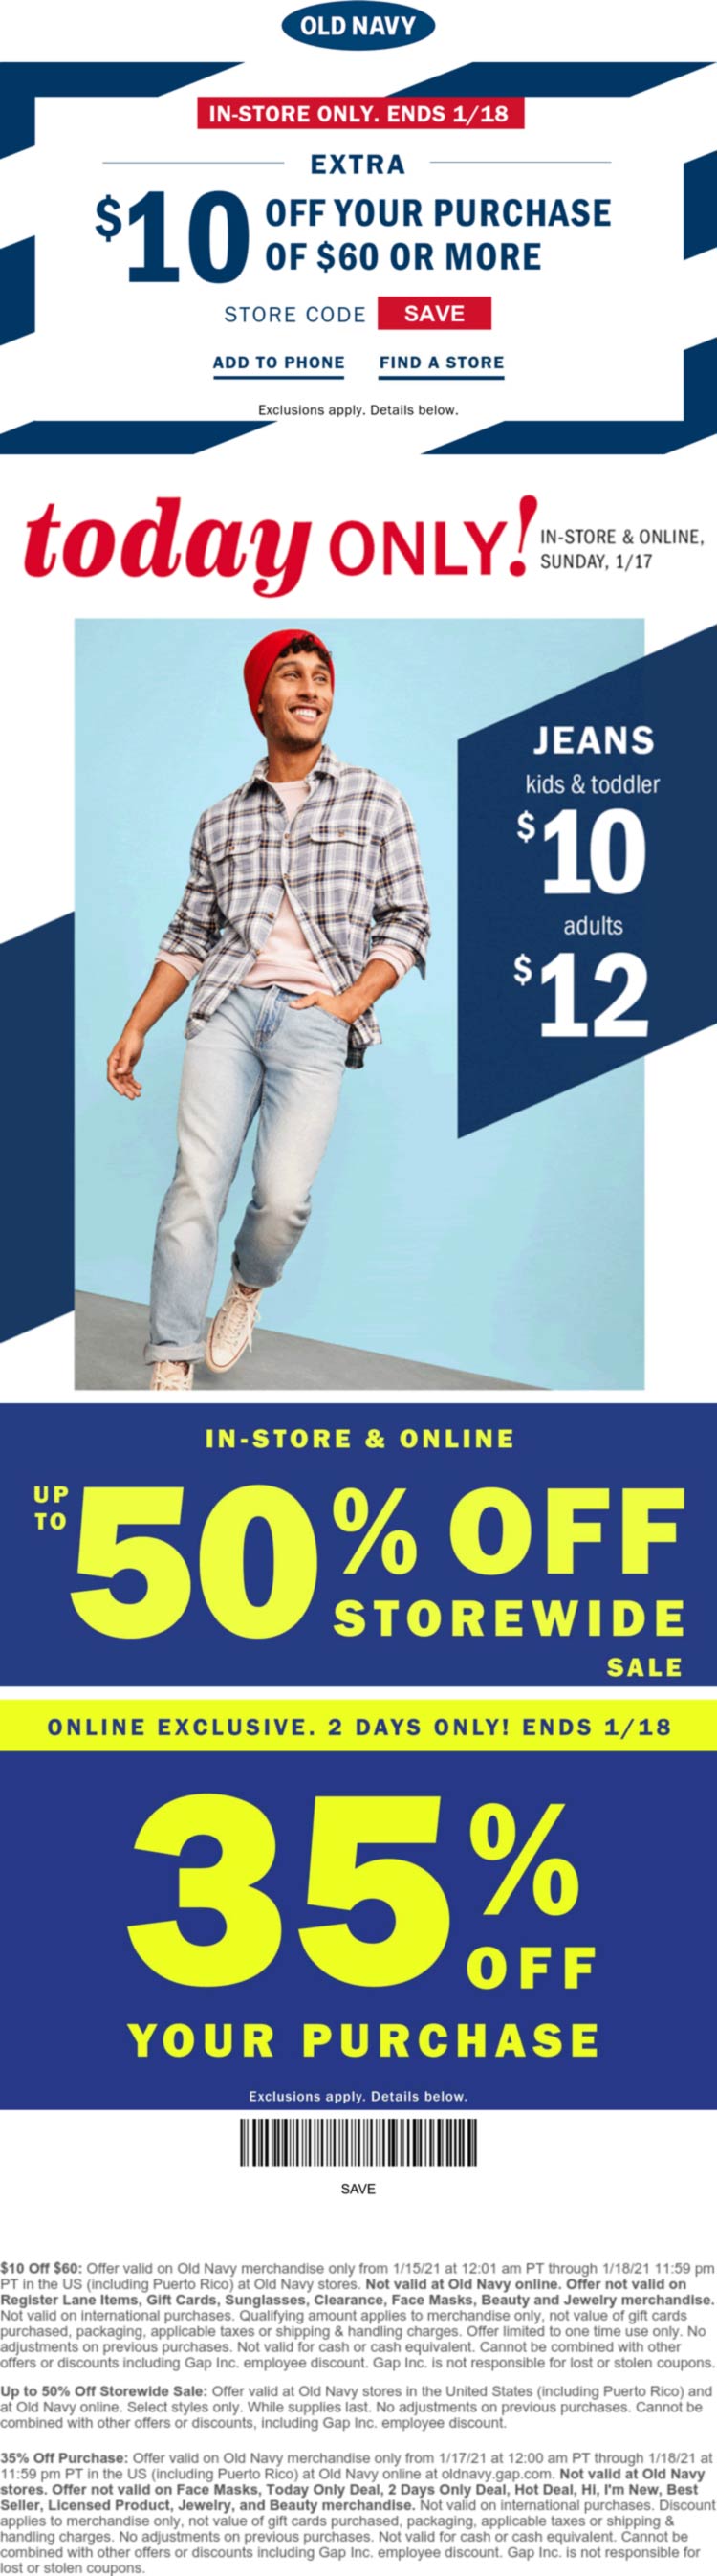 Old Navy stores Coupon  $10 off $60 & more at Old Navy #oldnavy 